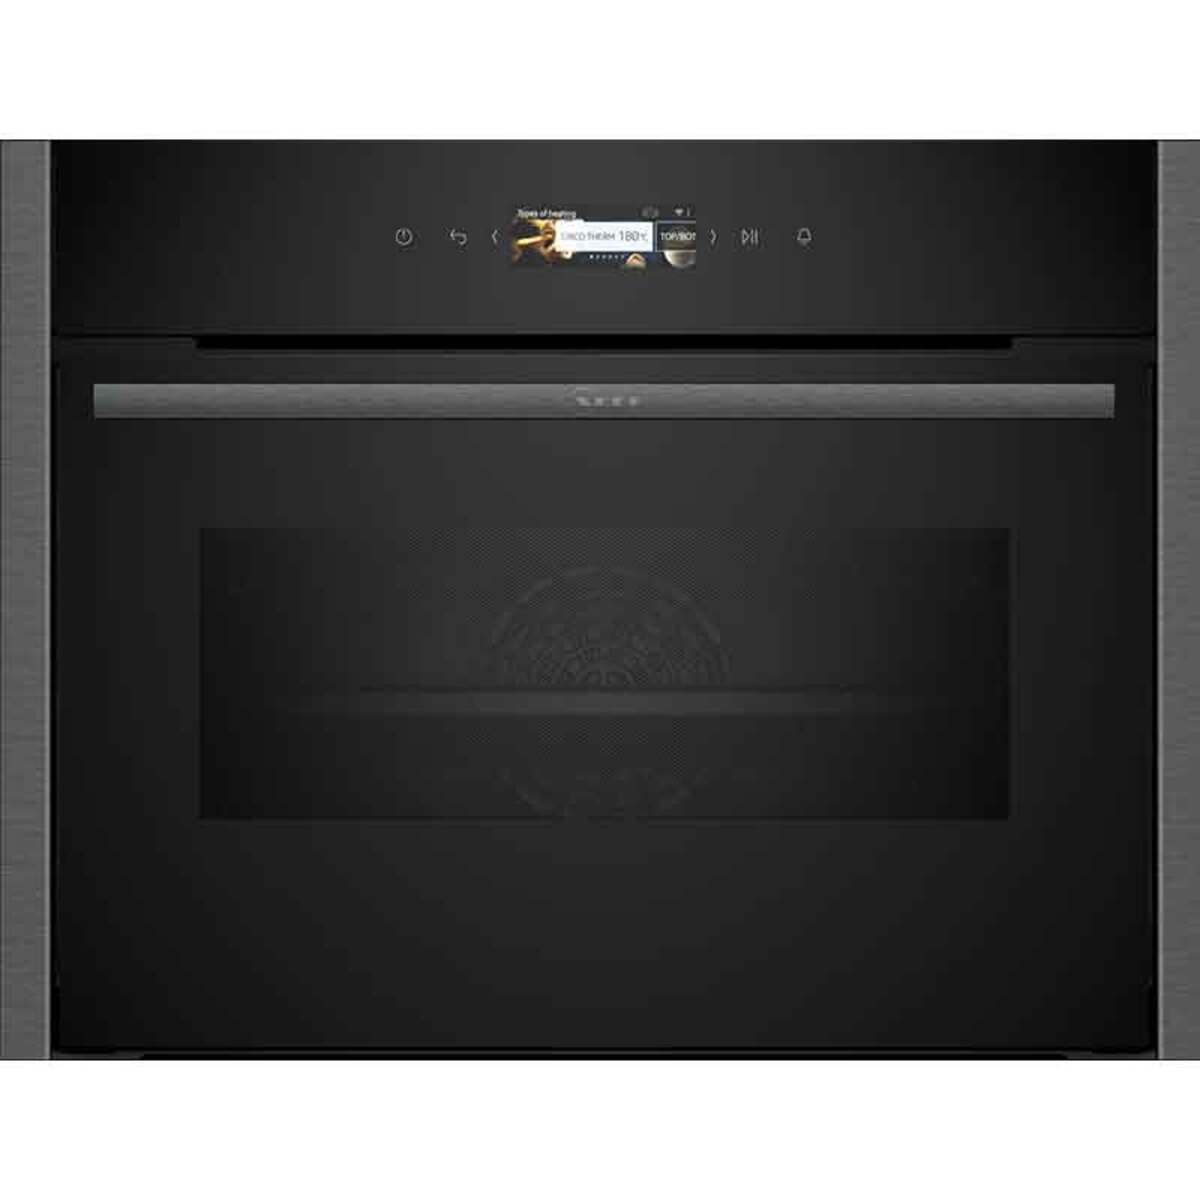 NEFF C24MR21G0B Built-in compact Oven with Microwave Function